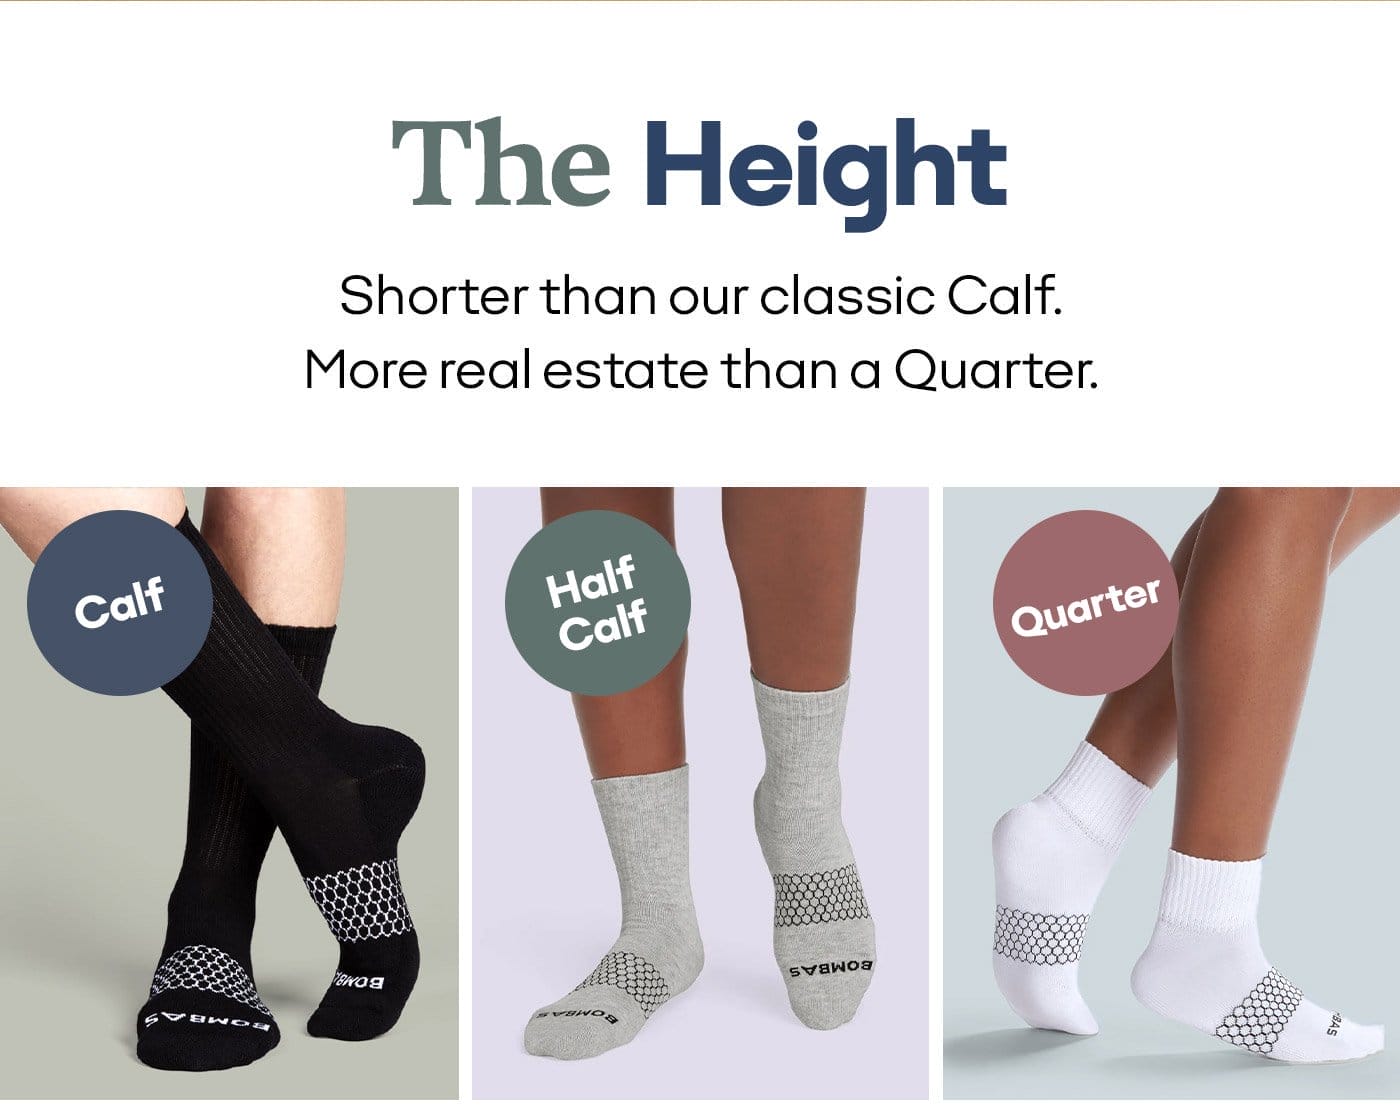 The Height Shorter than our classic Calf. More real estate than a Quarter.